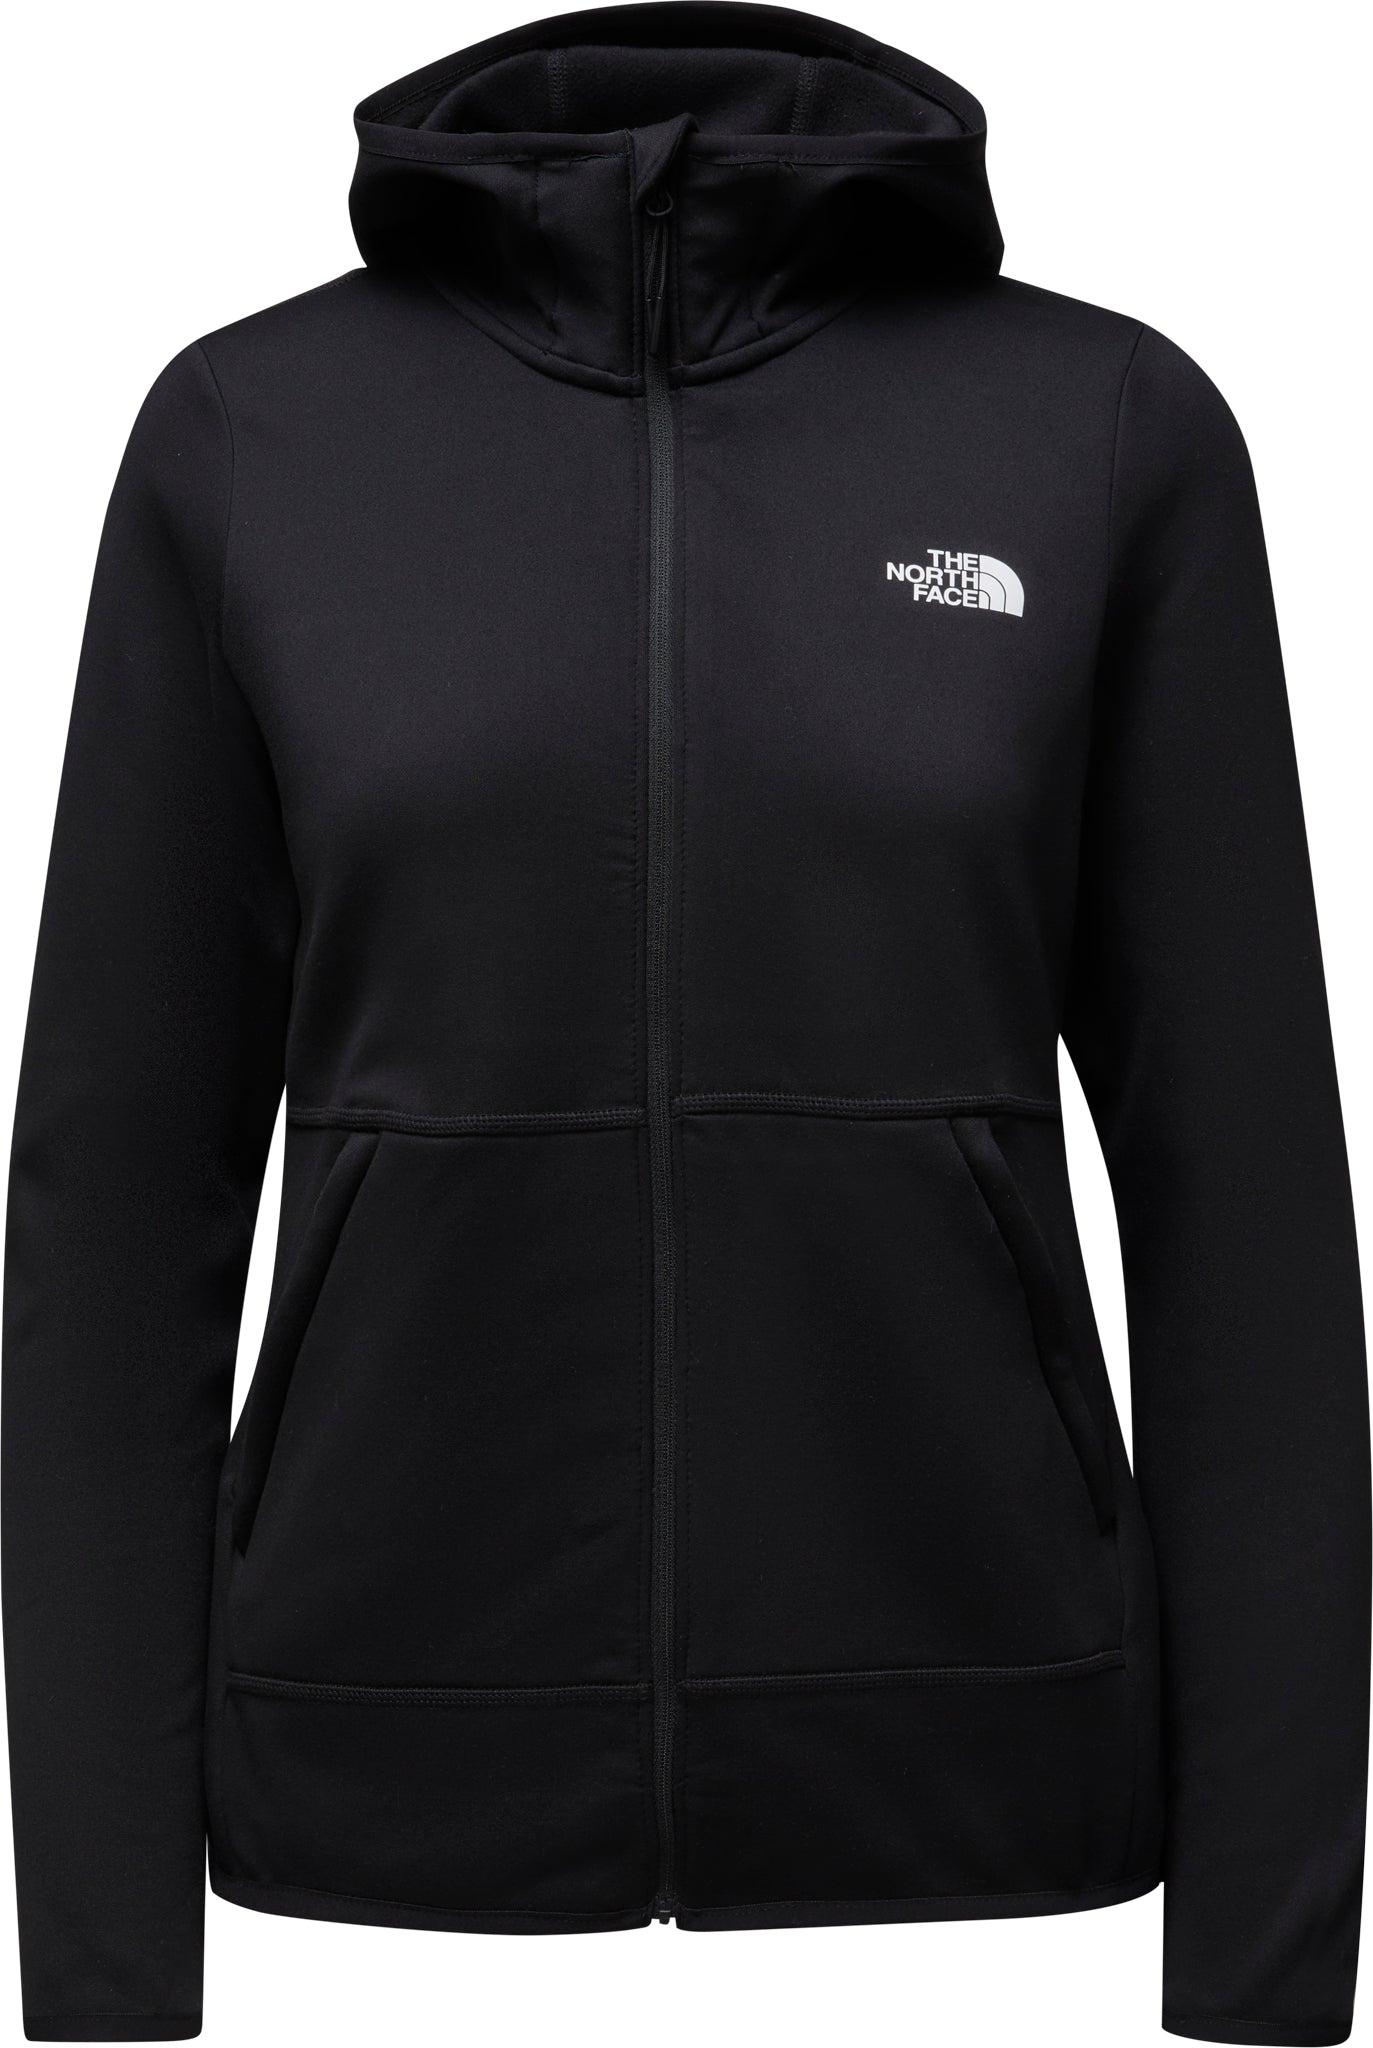 The North Face Canyonlands Jogger - Women's - Clothing